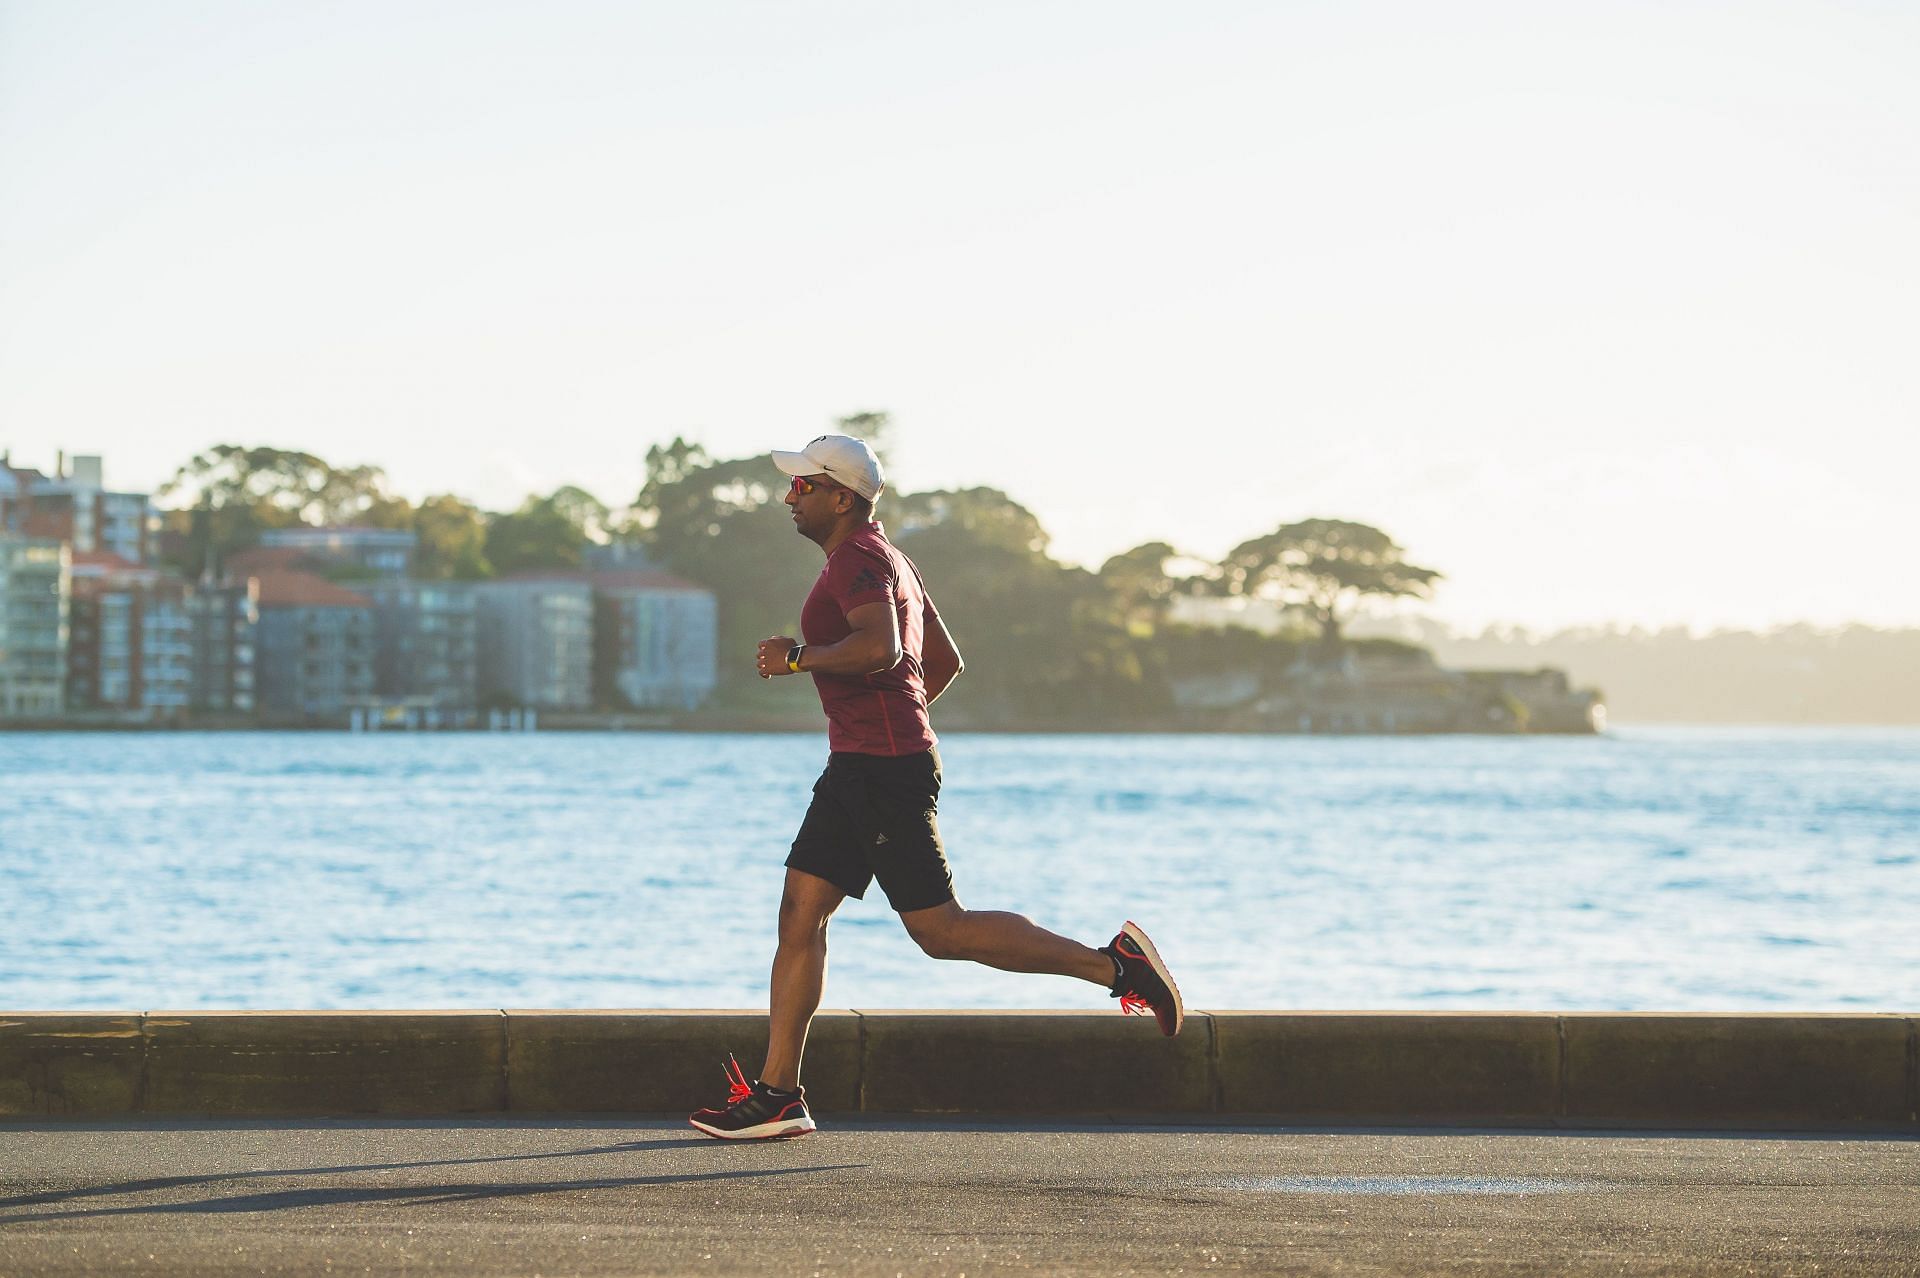 low-impact cardio are easy and great for your health. (Image via Unsplash / Chander R)